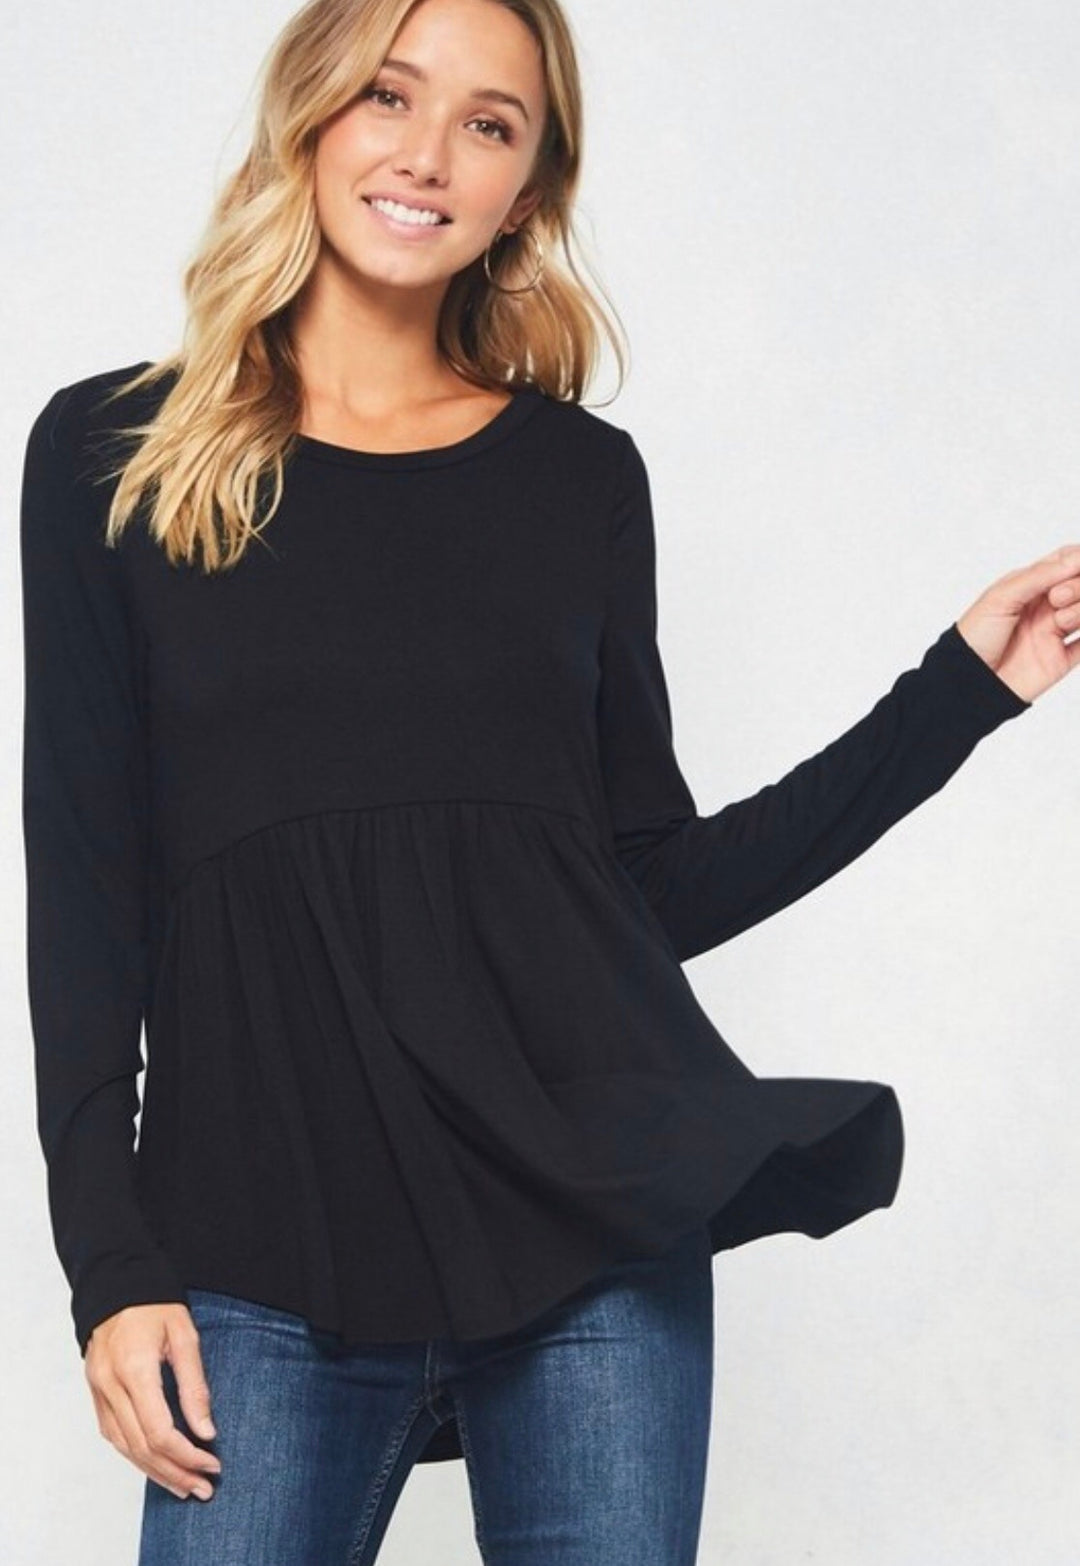 Flare For Drama Top - Black